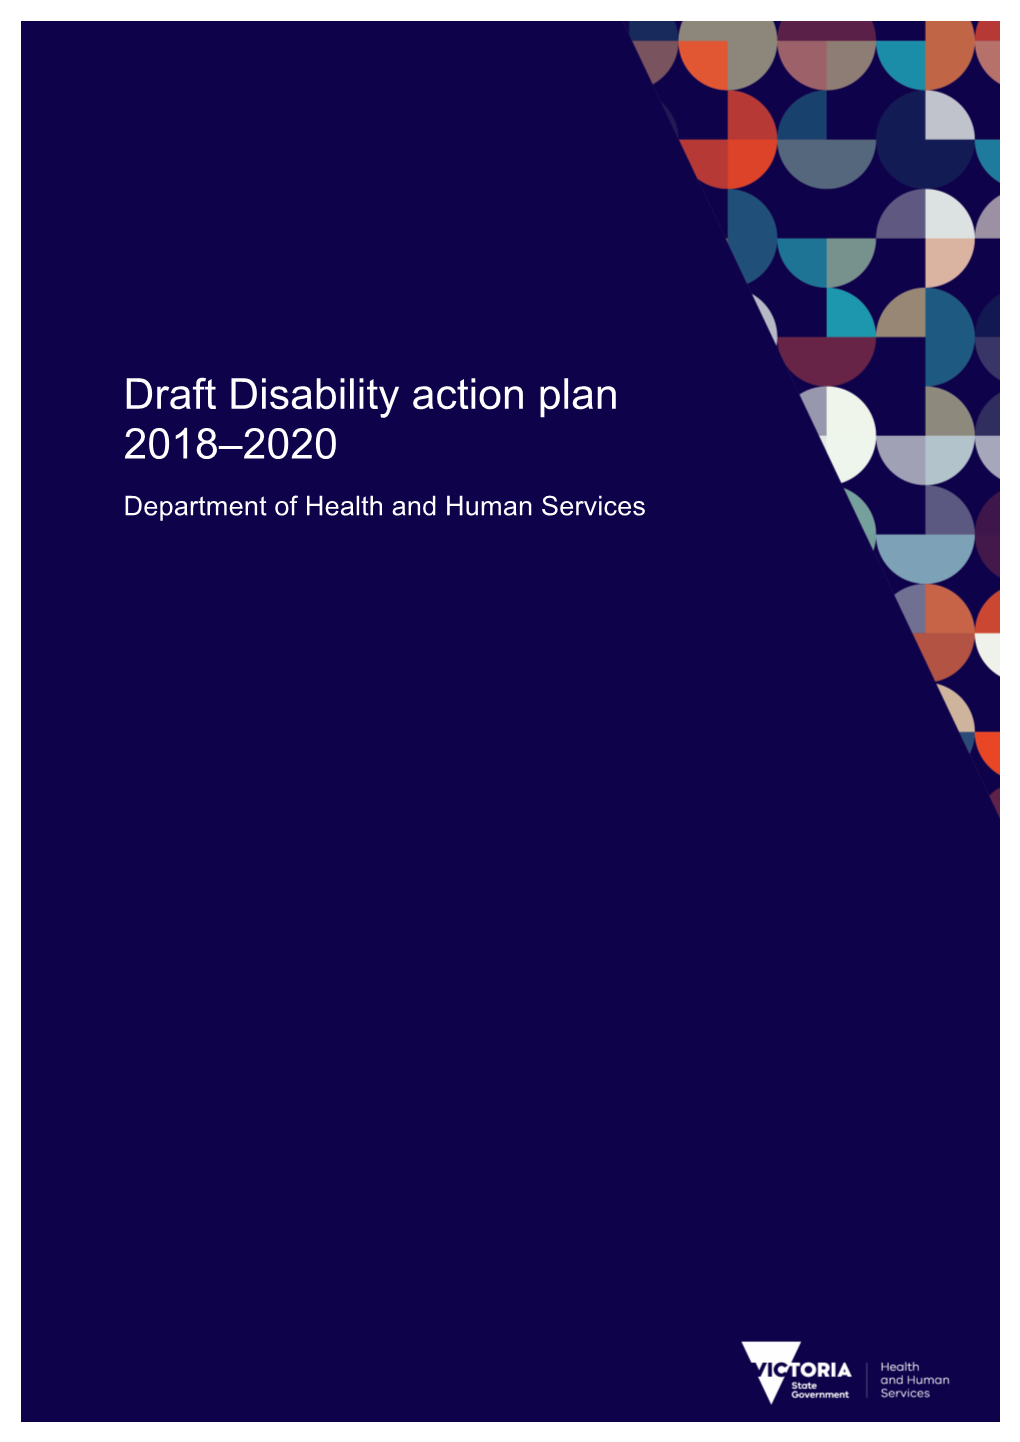 Draft Disability Action Plan 2018-2020 Department of Health and Human Services